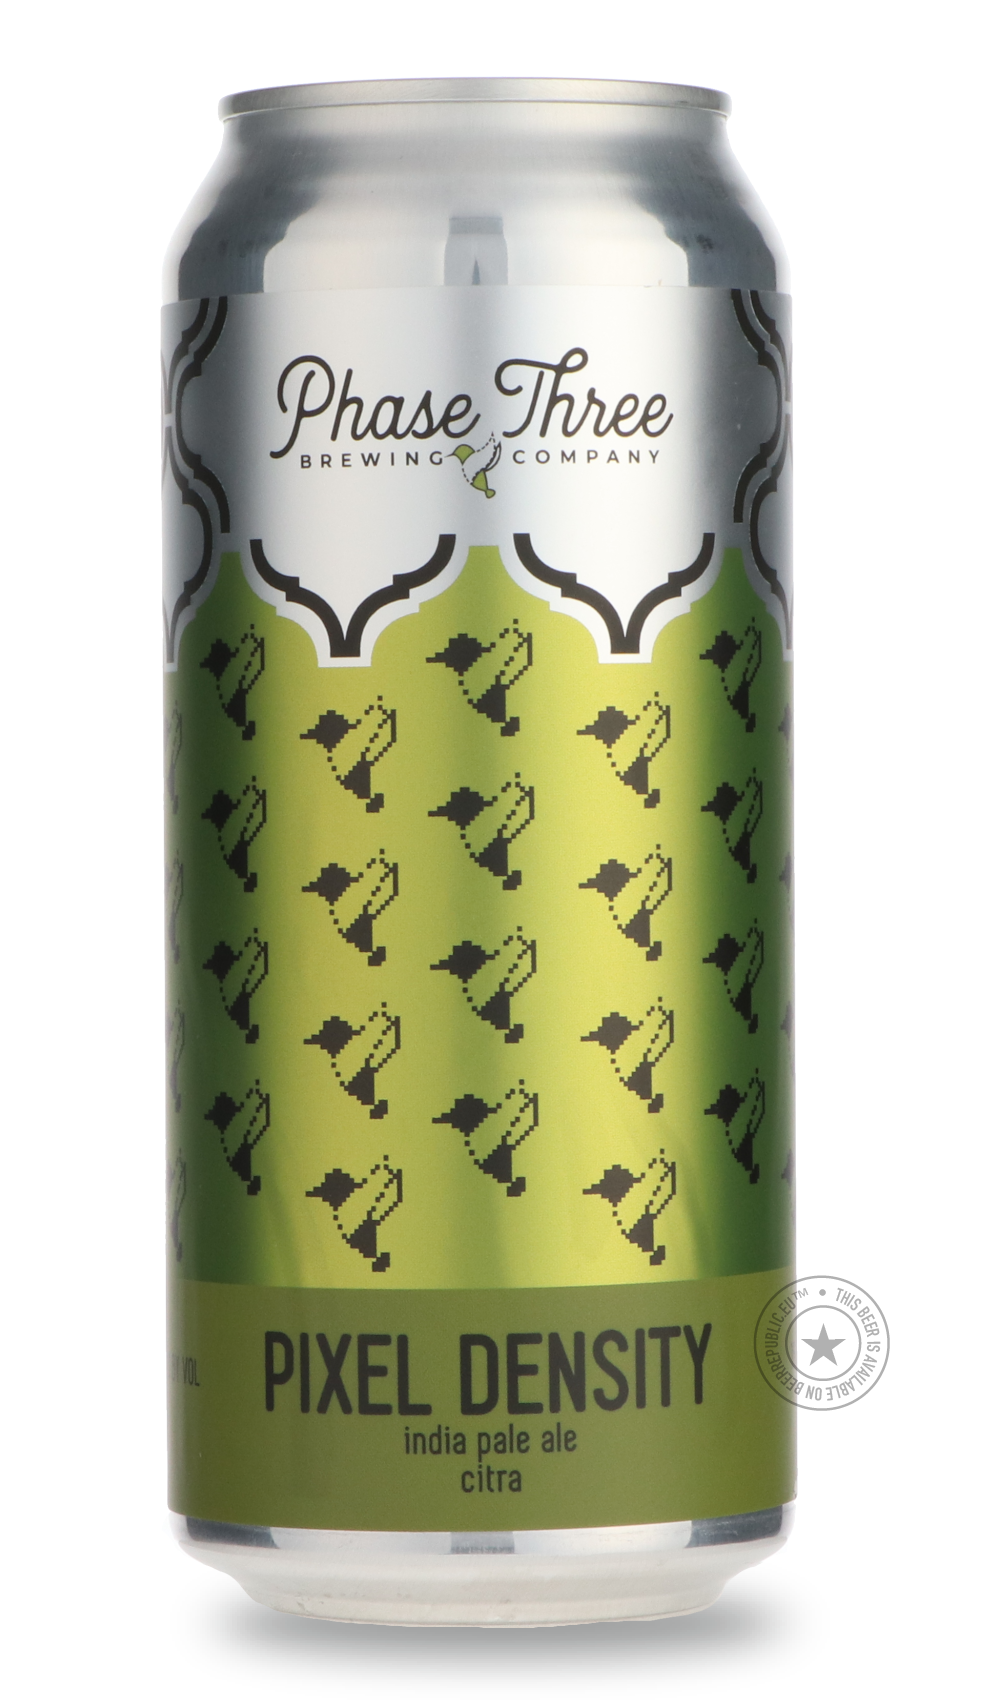 -Phase Three- Pixel Density-IPA- Only @ Beer Republic - The best online beer store for American & Canadian craft beer - Buy beer online from the USA and Canada - Bier online kopen - Amerikaans bier kopen - Craft beer store - Craft beer kopen - Amerikanisch bier kaufen - Bier online kaufen - Acheter biere online - IPA - Stout - Porter - New England IPA - Hazy IPA - Imperial Stout - Barrel Aged - Barrel Aged Imperial Stout - Brown - Dark beer - Blond - Blonde - Pilsner - Lager - Wheat - Weizen - Amber - Barle